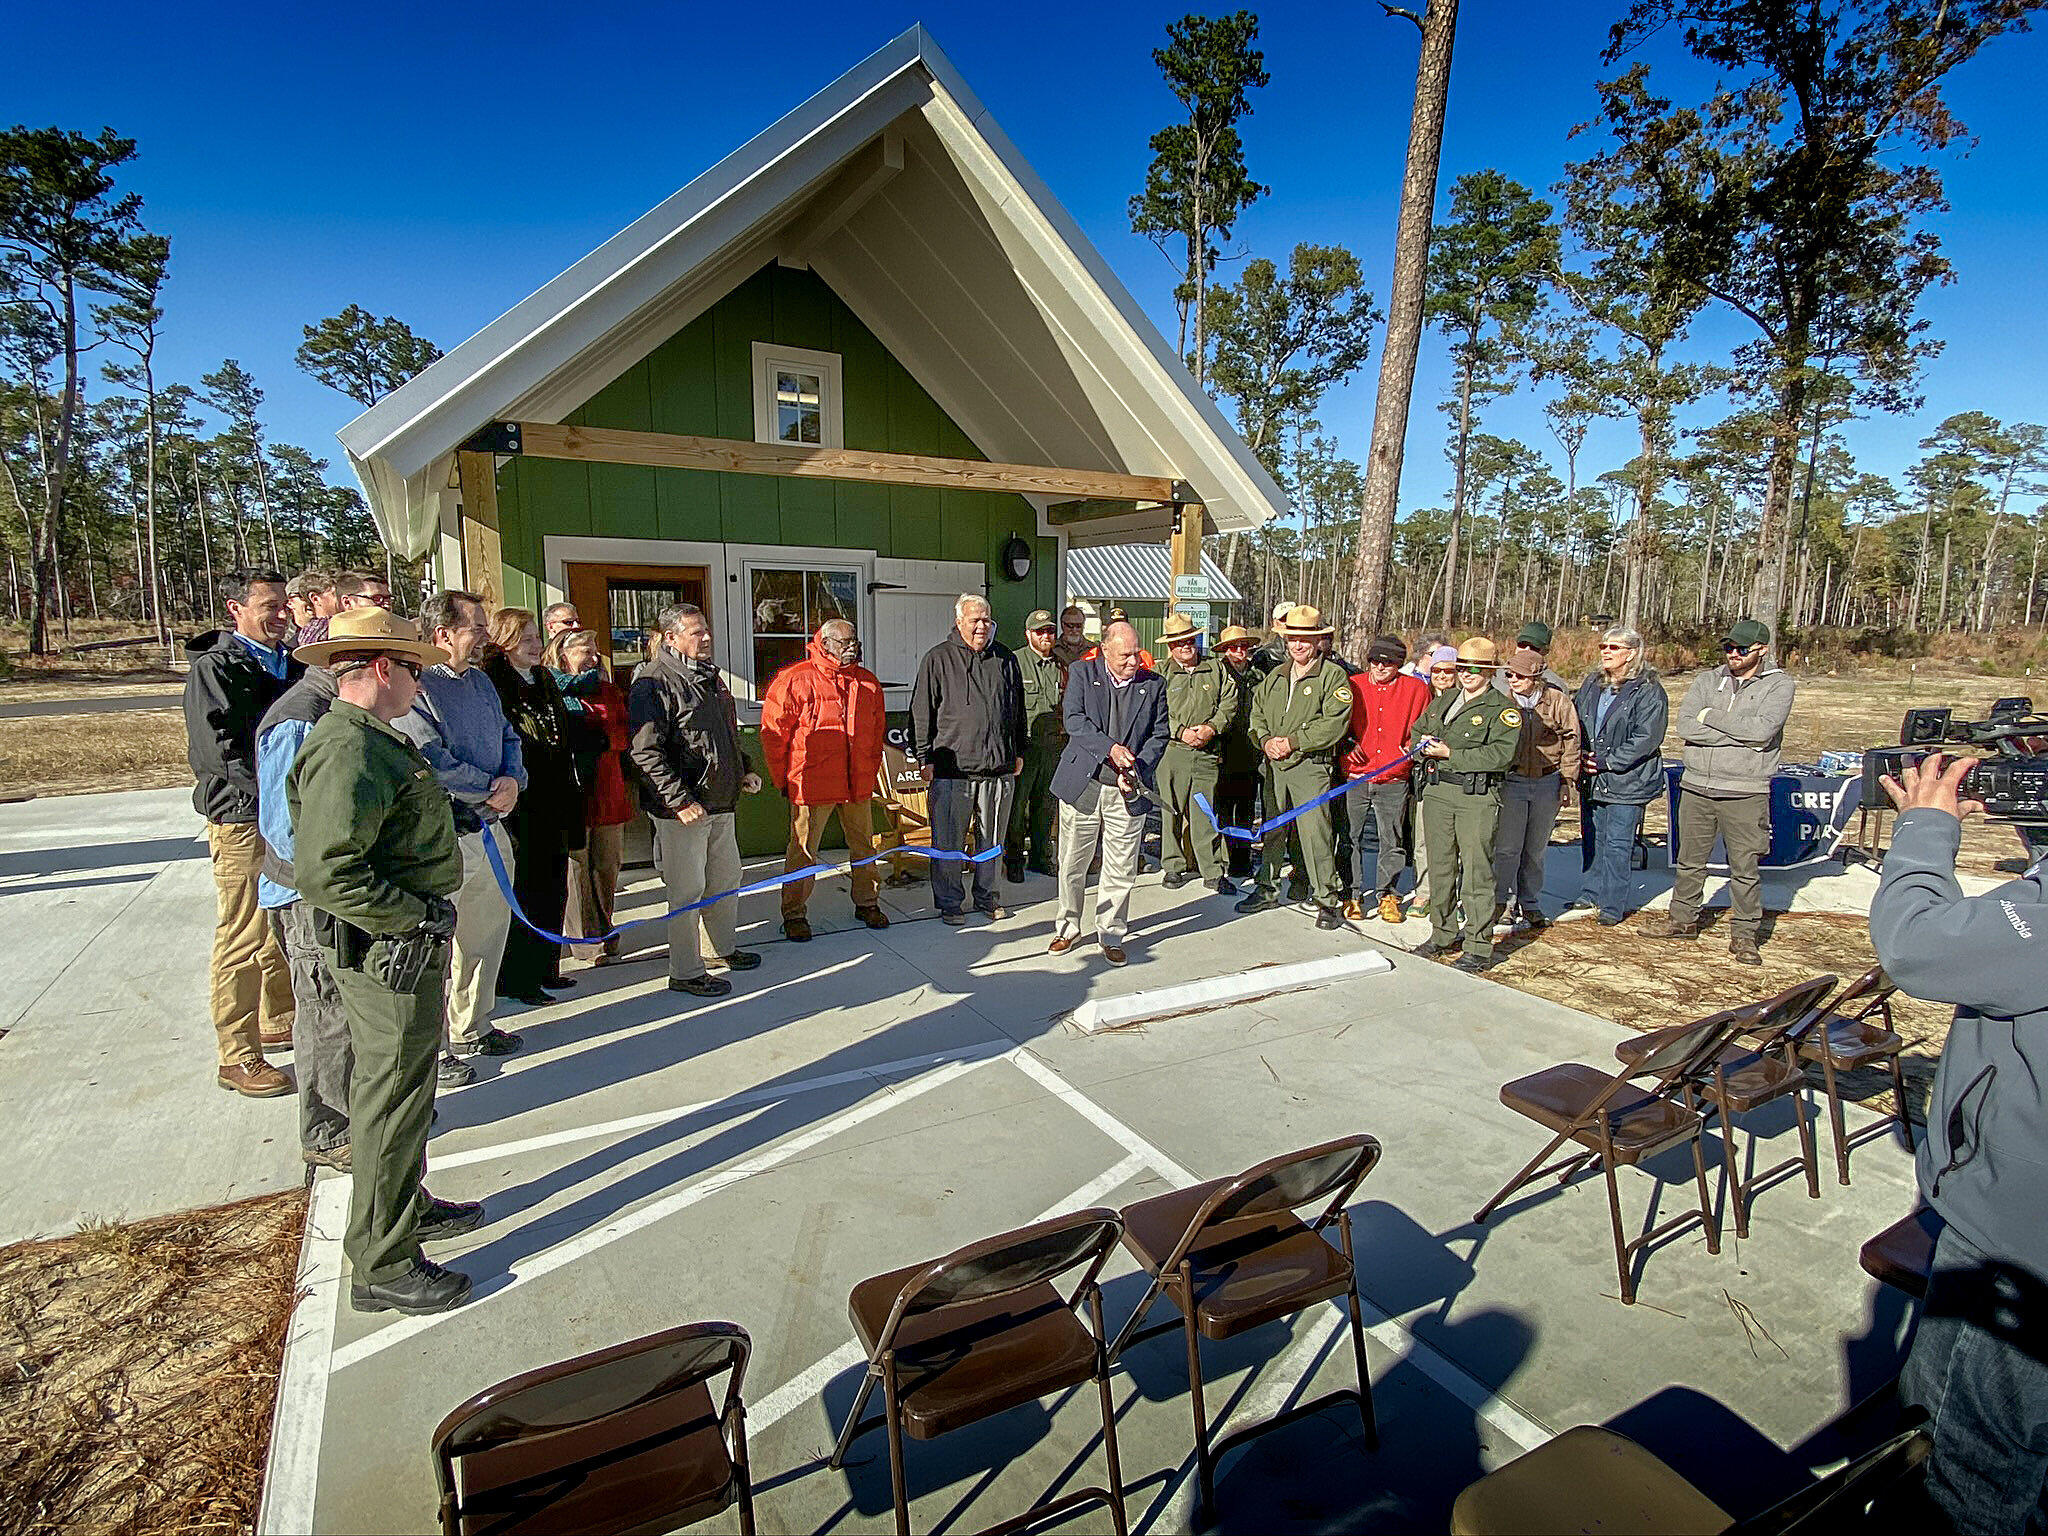 GOOSE CREEK STATE PARK CAMPGROUND IS OFFICIALLY OPEN! — Skinner Farlow